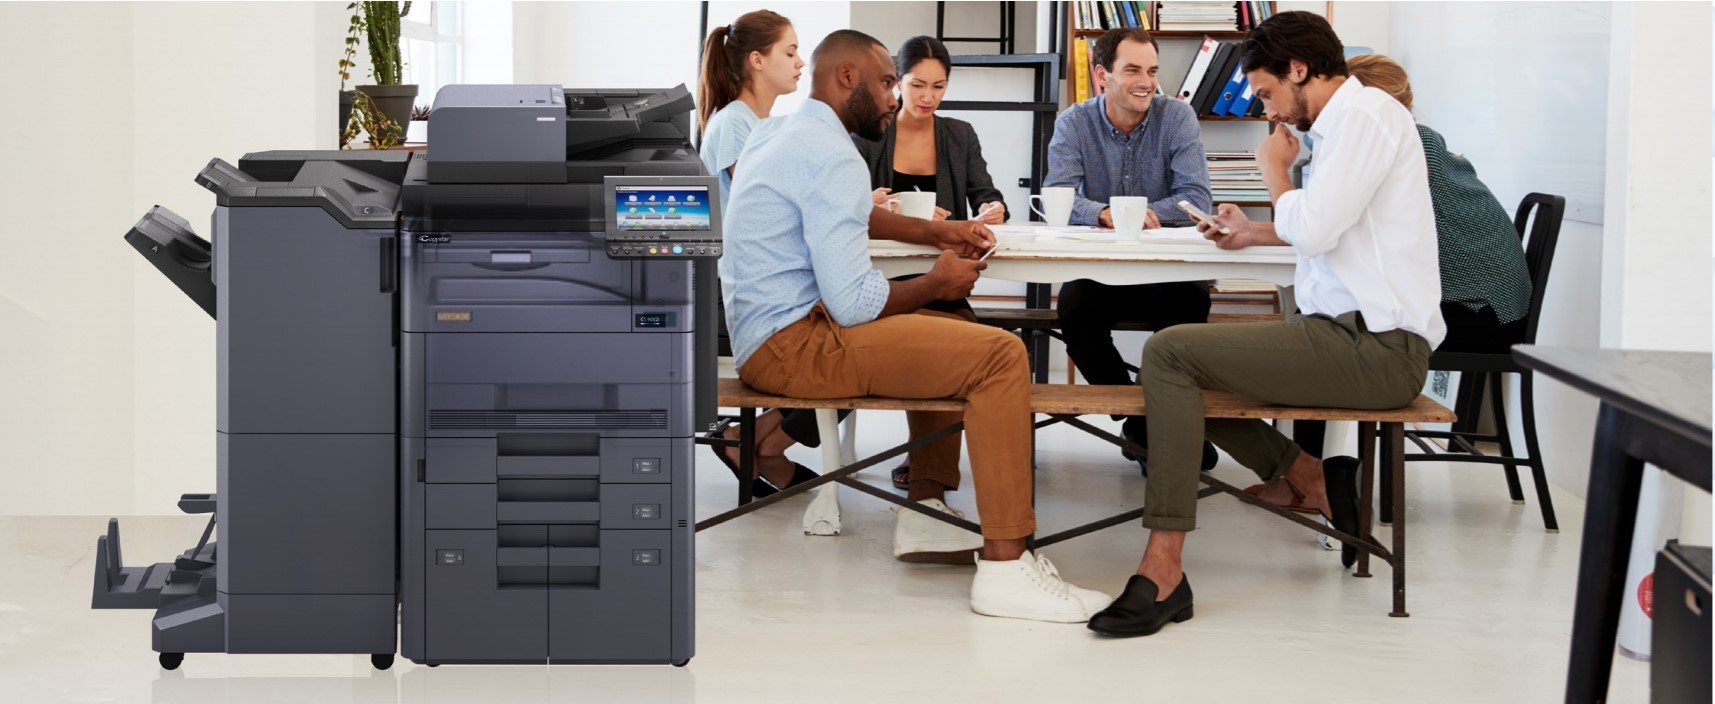 utax mps managed print services printing solution mfp